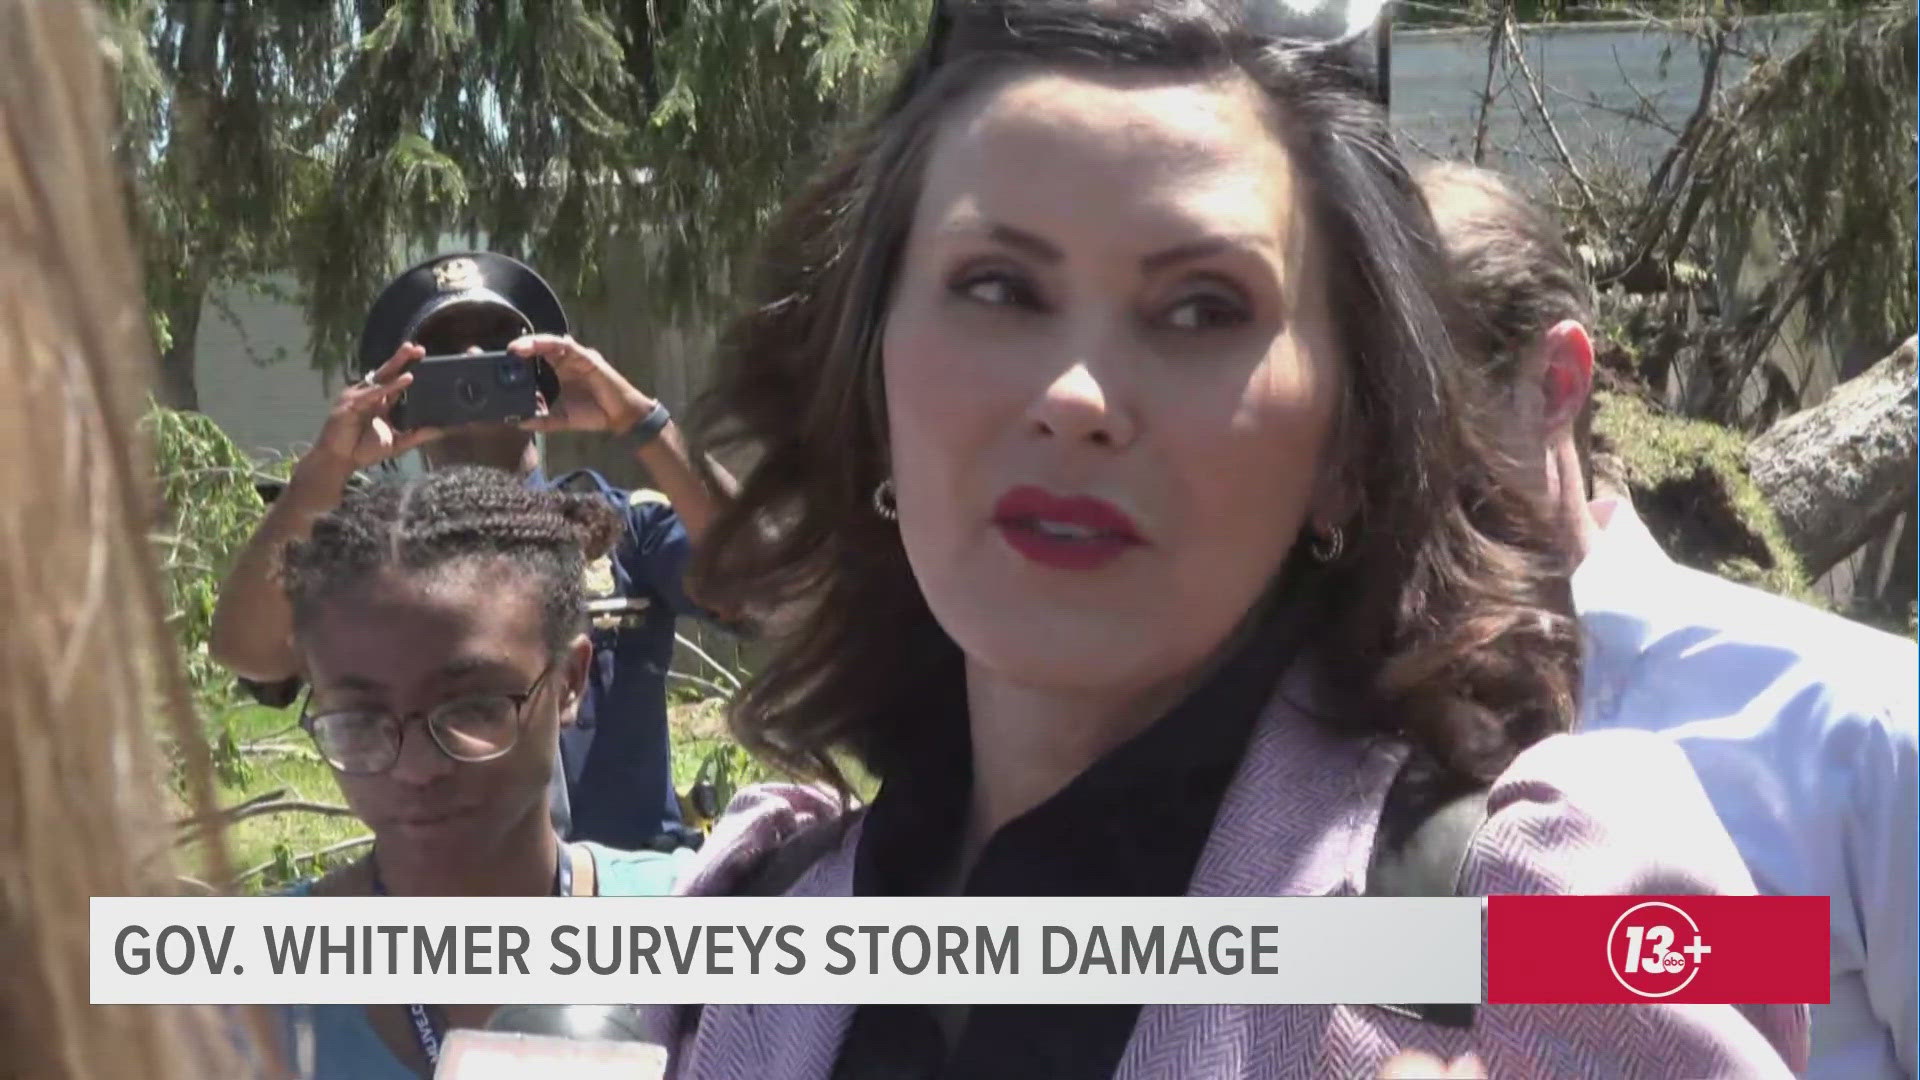 Michigan Governor Gretchen Whitmer visited Kalamazoo County Wednesday after multiple tornadoes caused severe damage to the area Tuesday evening.